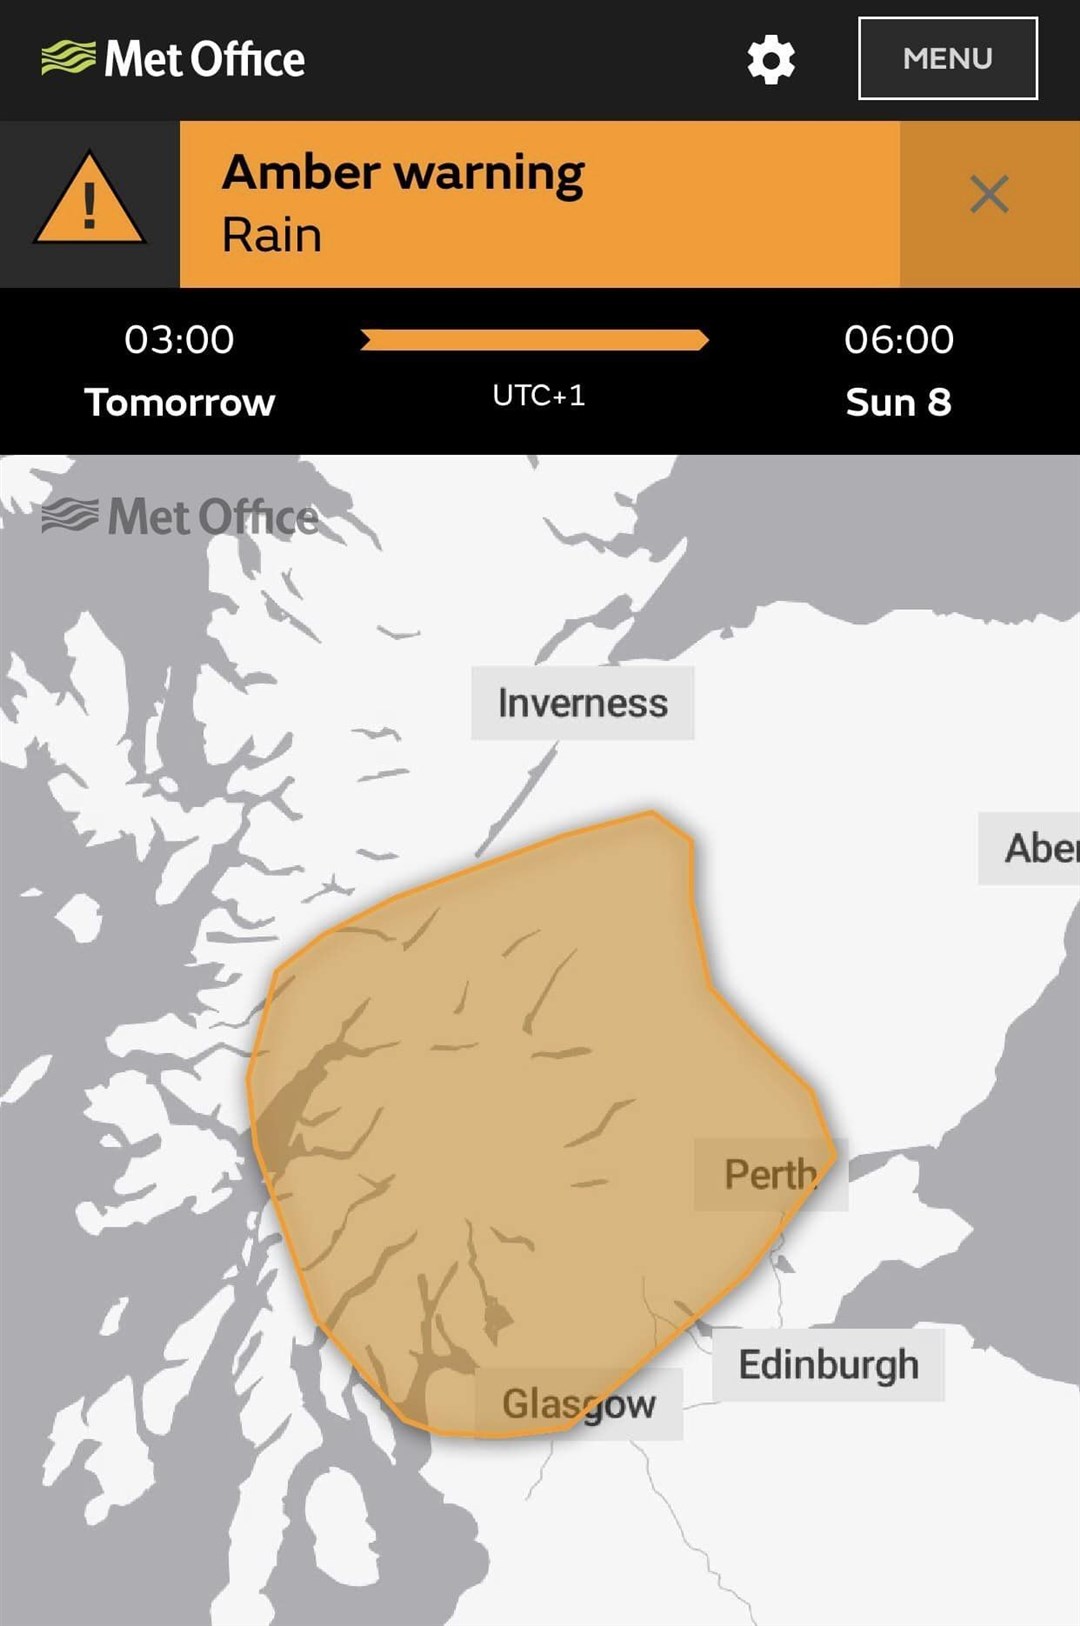 Amber warning covers west and south-west central Scotland